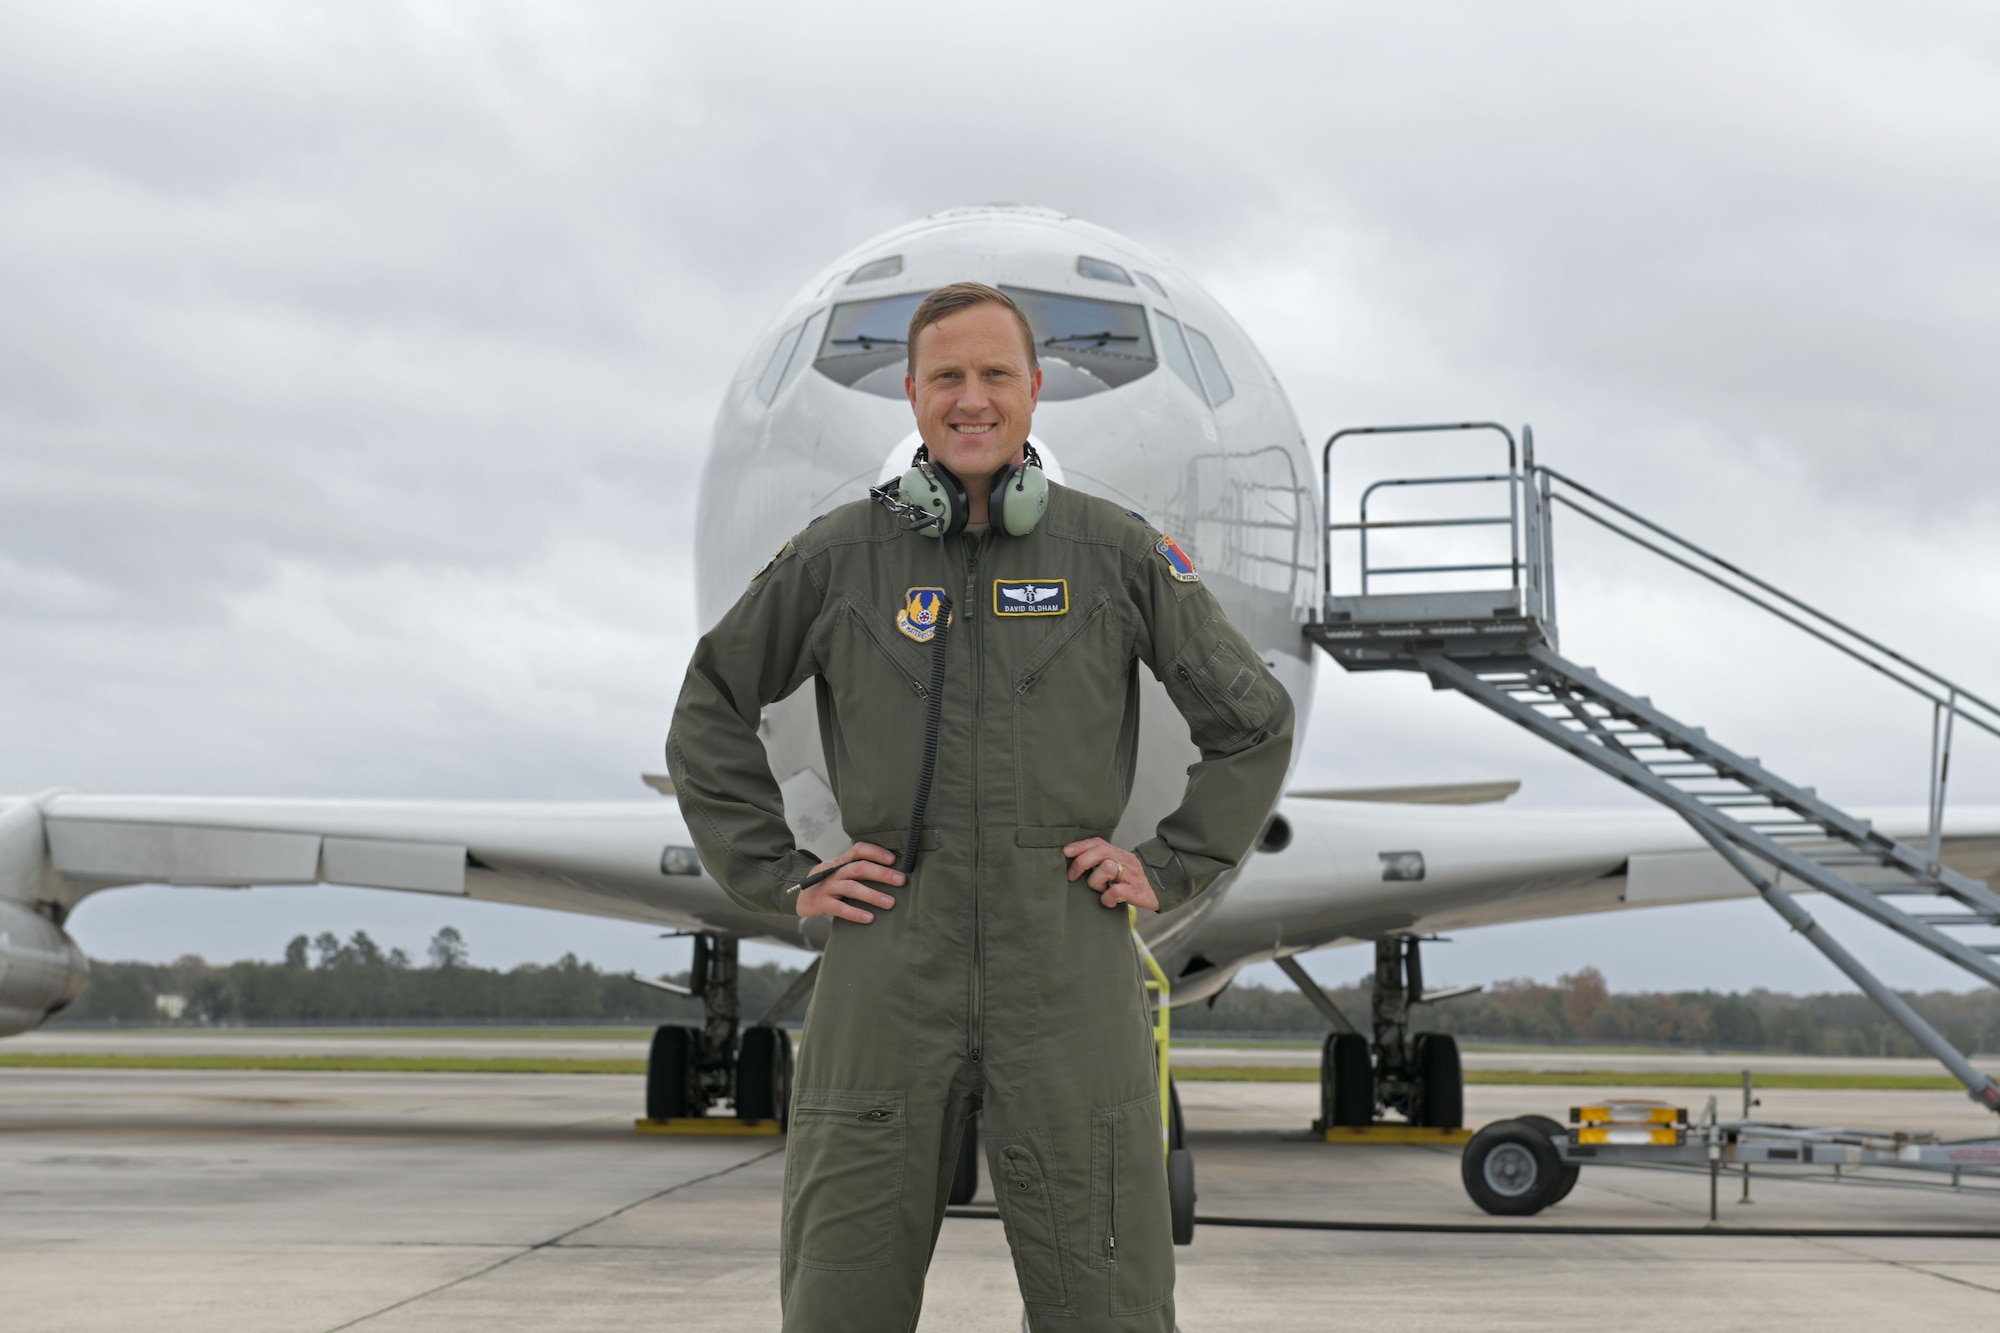 Photo shows man standing in front of aircraft.